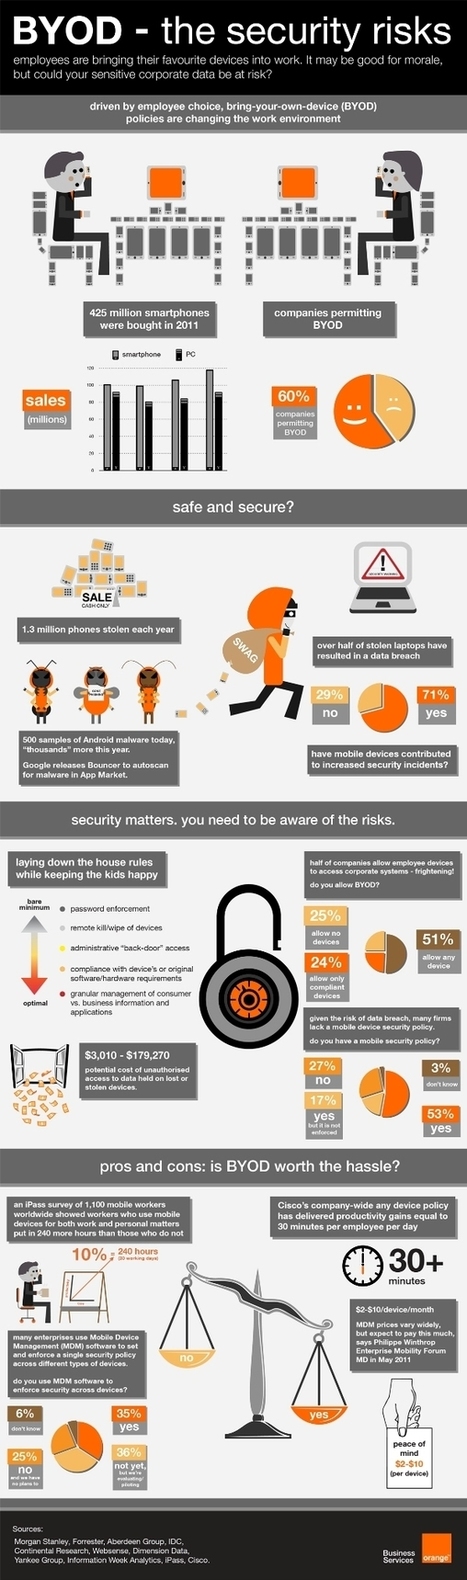 BYOD Security Issues [Infographic] | 21st Century Learning and Teaching | Scoop.it